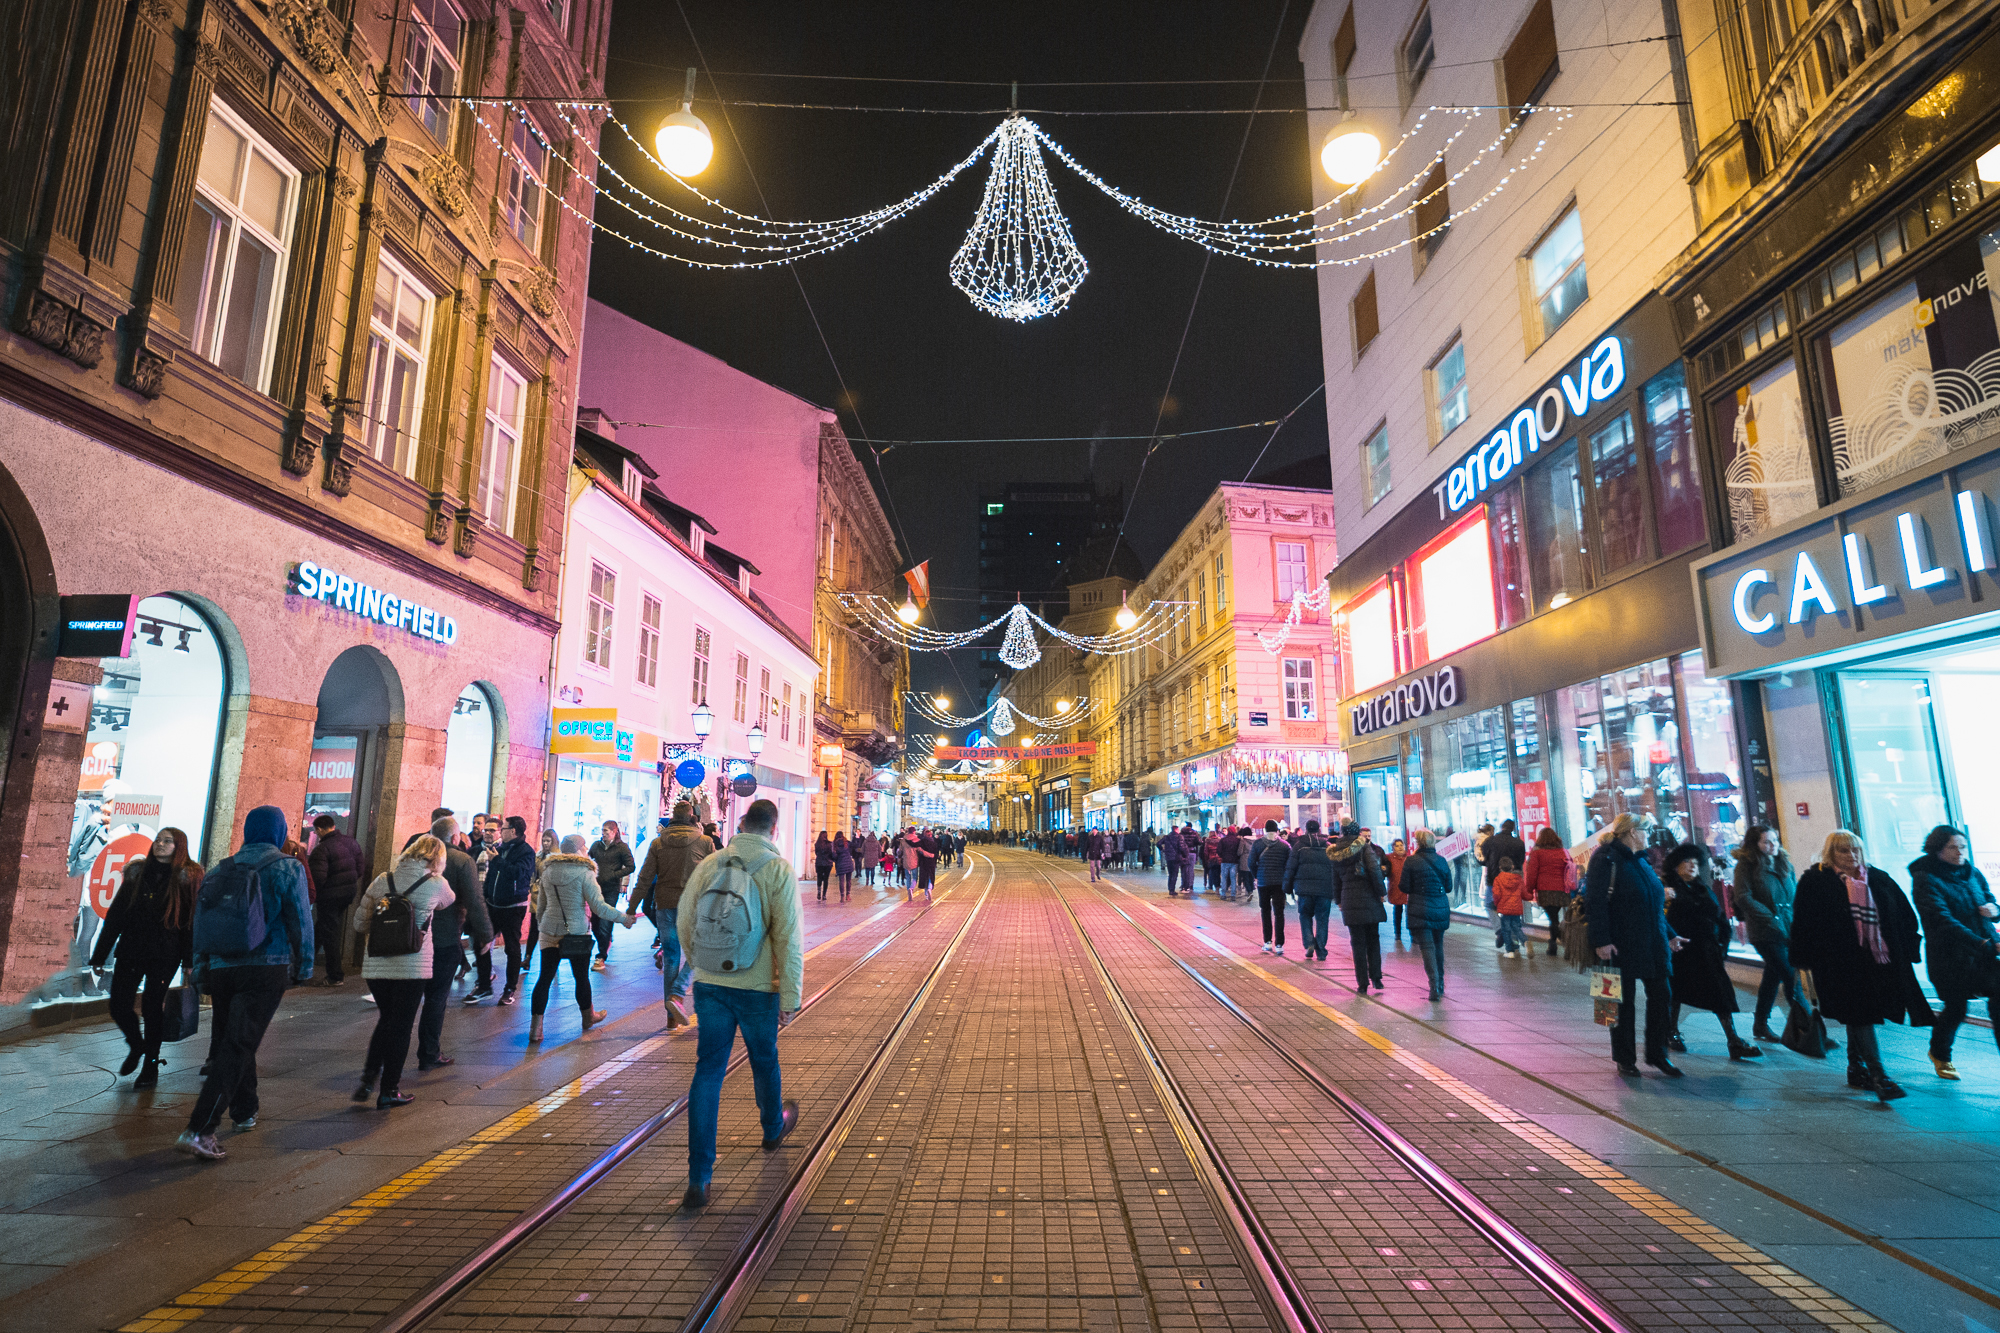 Street decorated with Christmas lights in Zagreb, Croatia